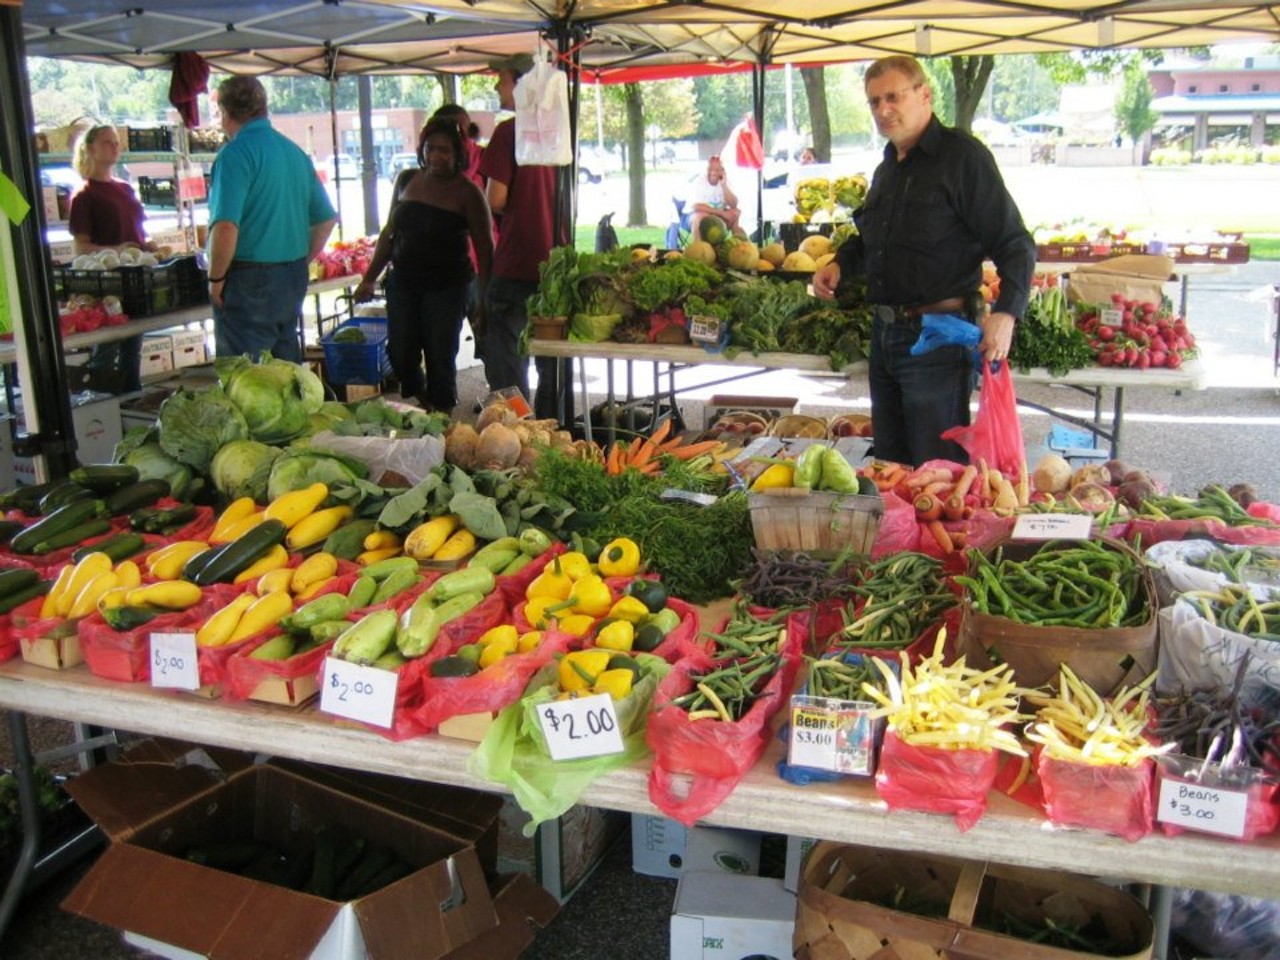 Lathrup Village Farmers Market
Lathrup Village, MI
This market is located right in between 11 mile and 12 mile and offers Michigan grown produce for people with a variety of income levels. If you need transportation to the market, don&#146;t worry. SMART has twelve bus stops in the city. The market also accepts EBT Debit cards. 
Photo via Facebook: Lathrup Village Farmers Market